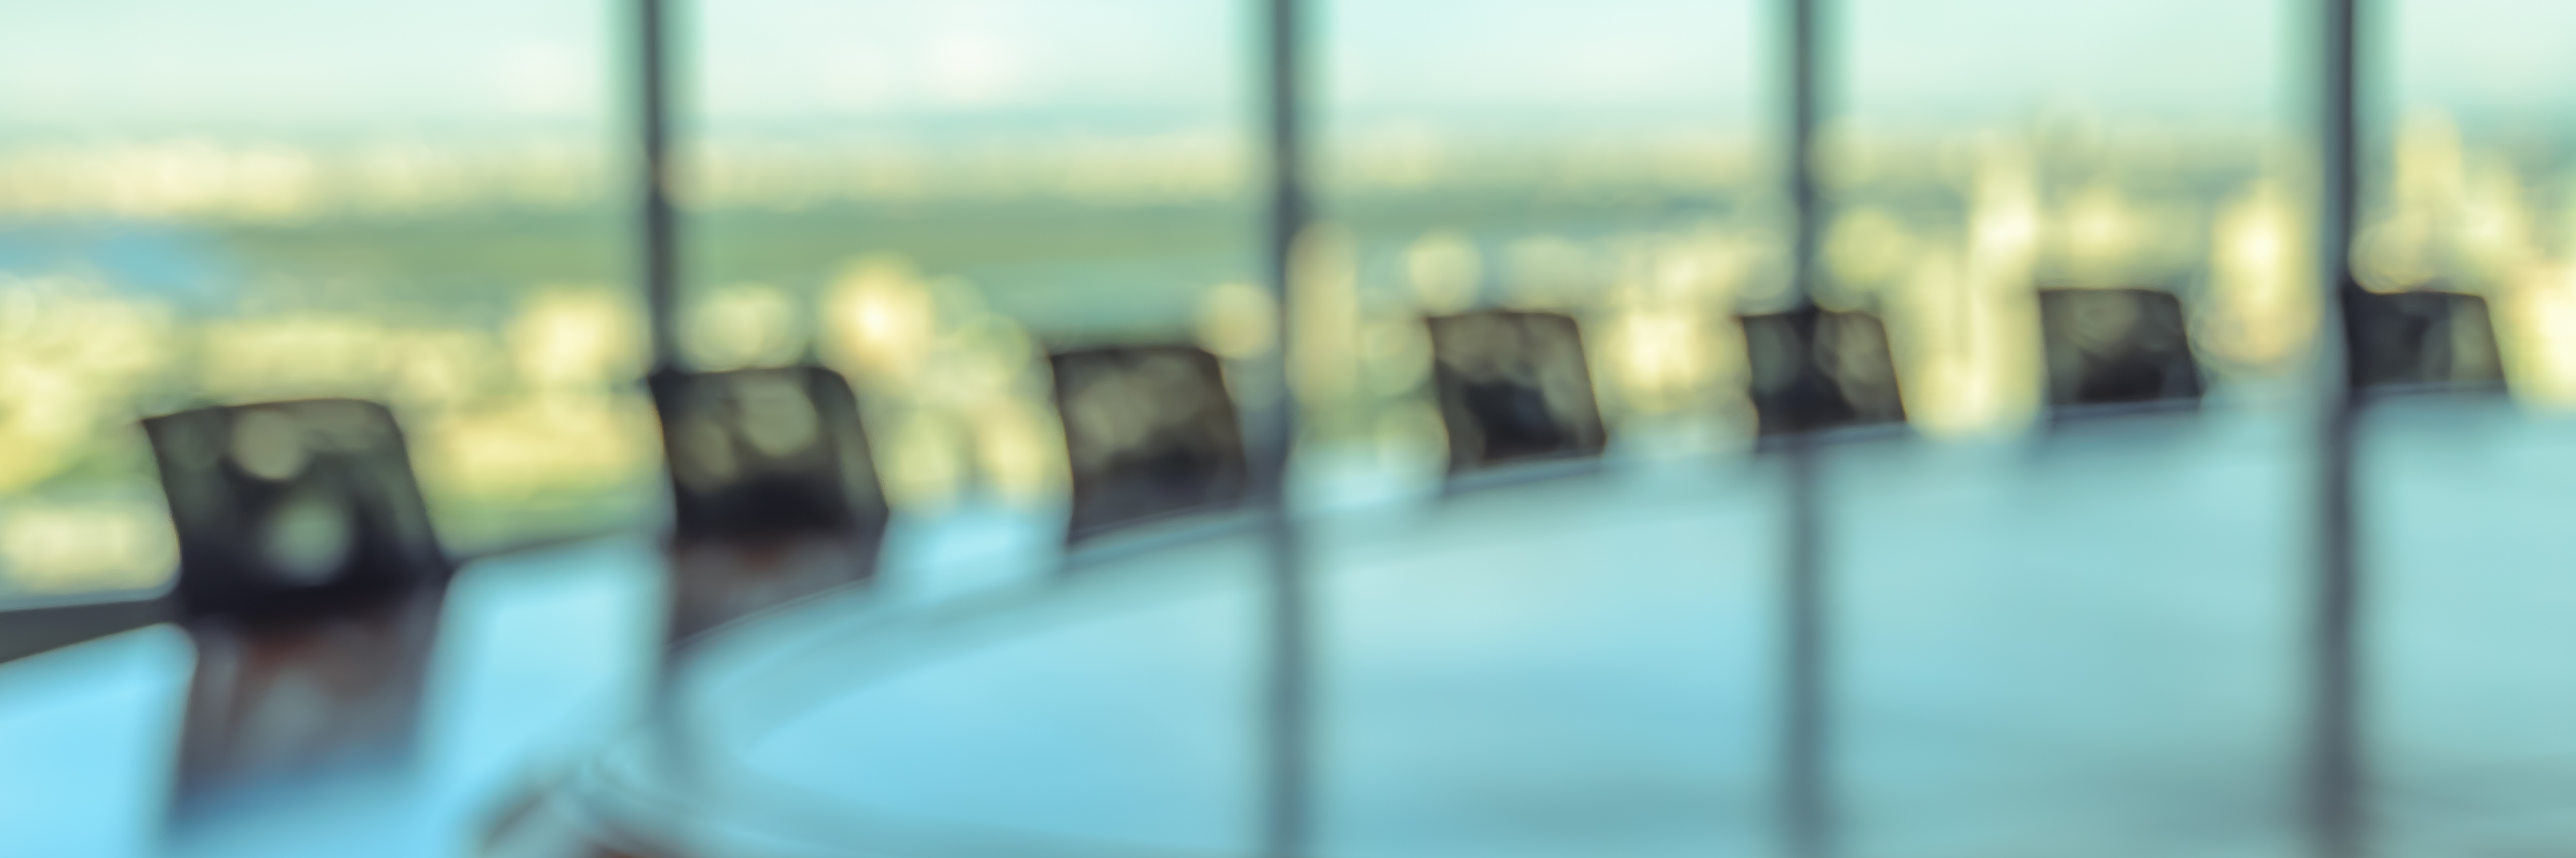 Blurred image of empty boardroom with window cityscape background.